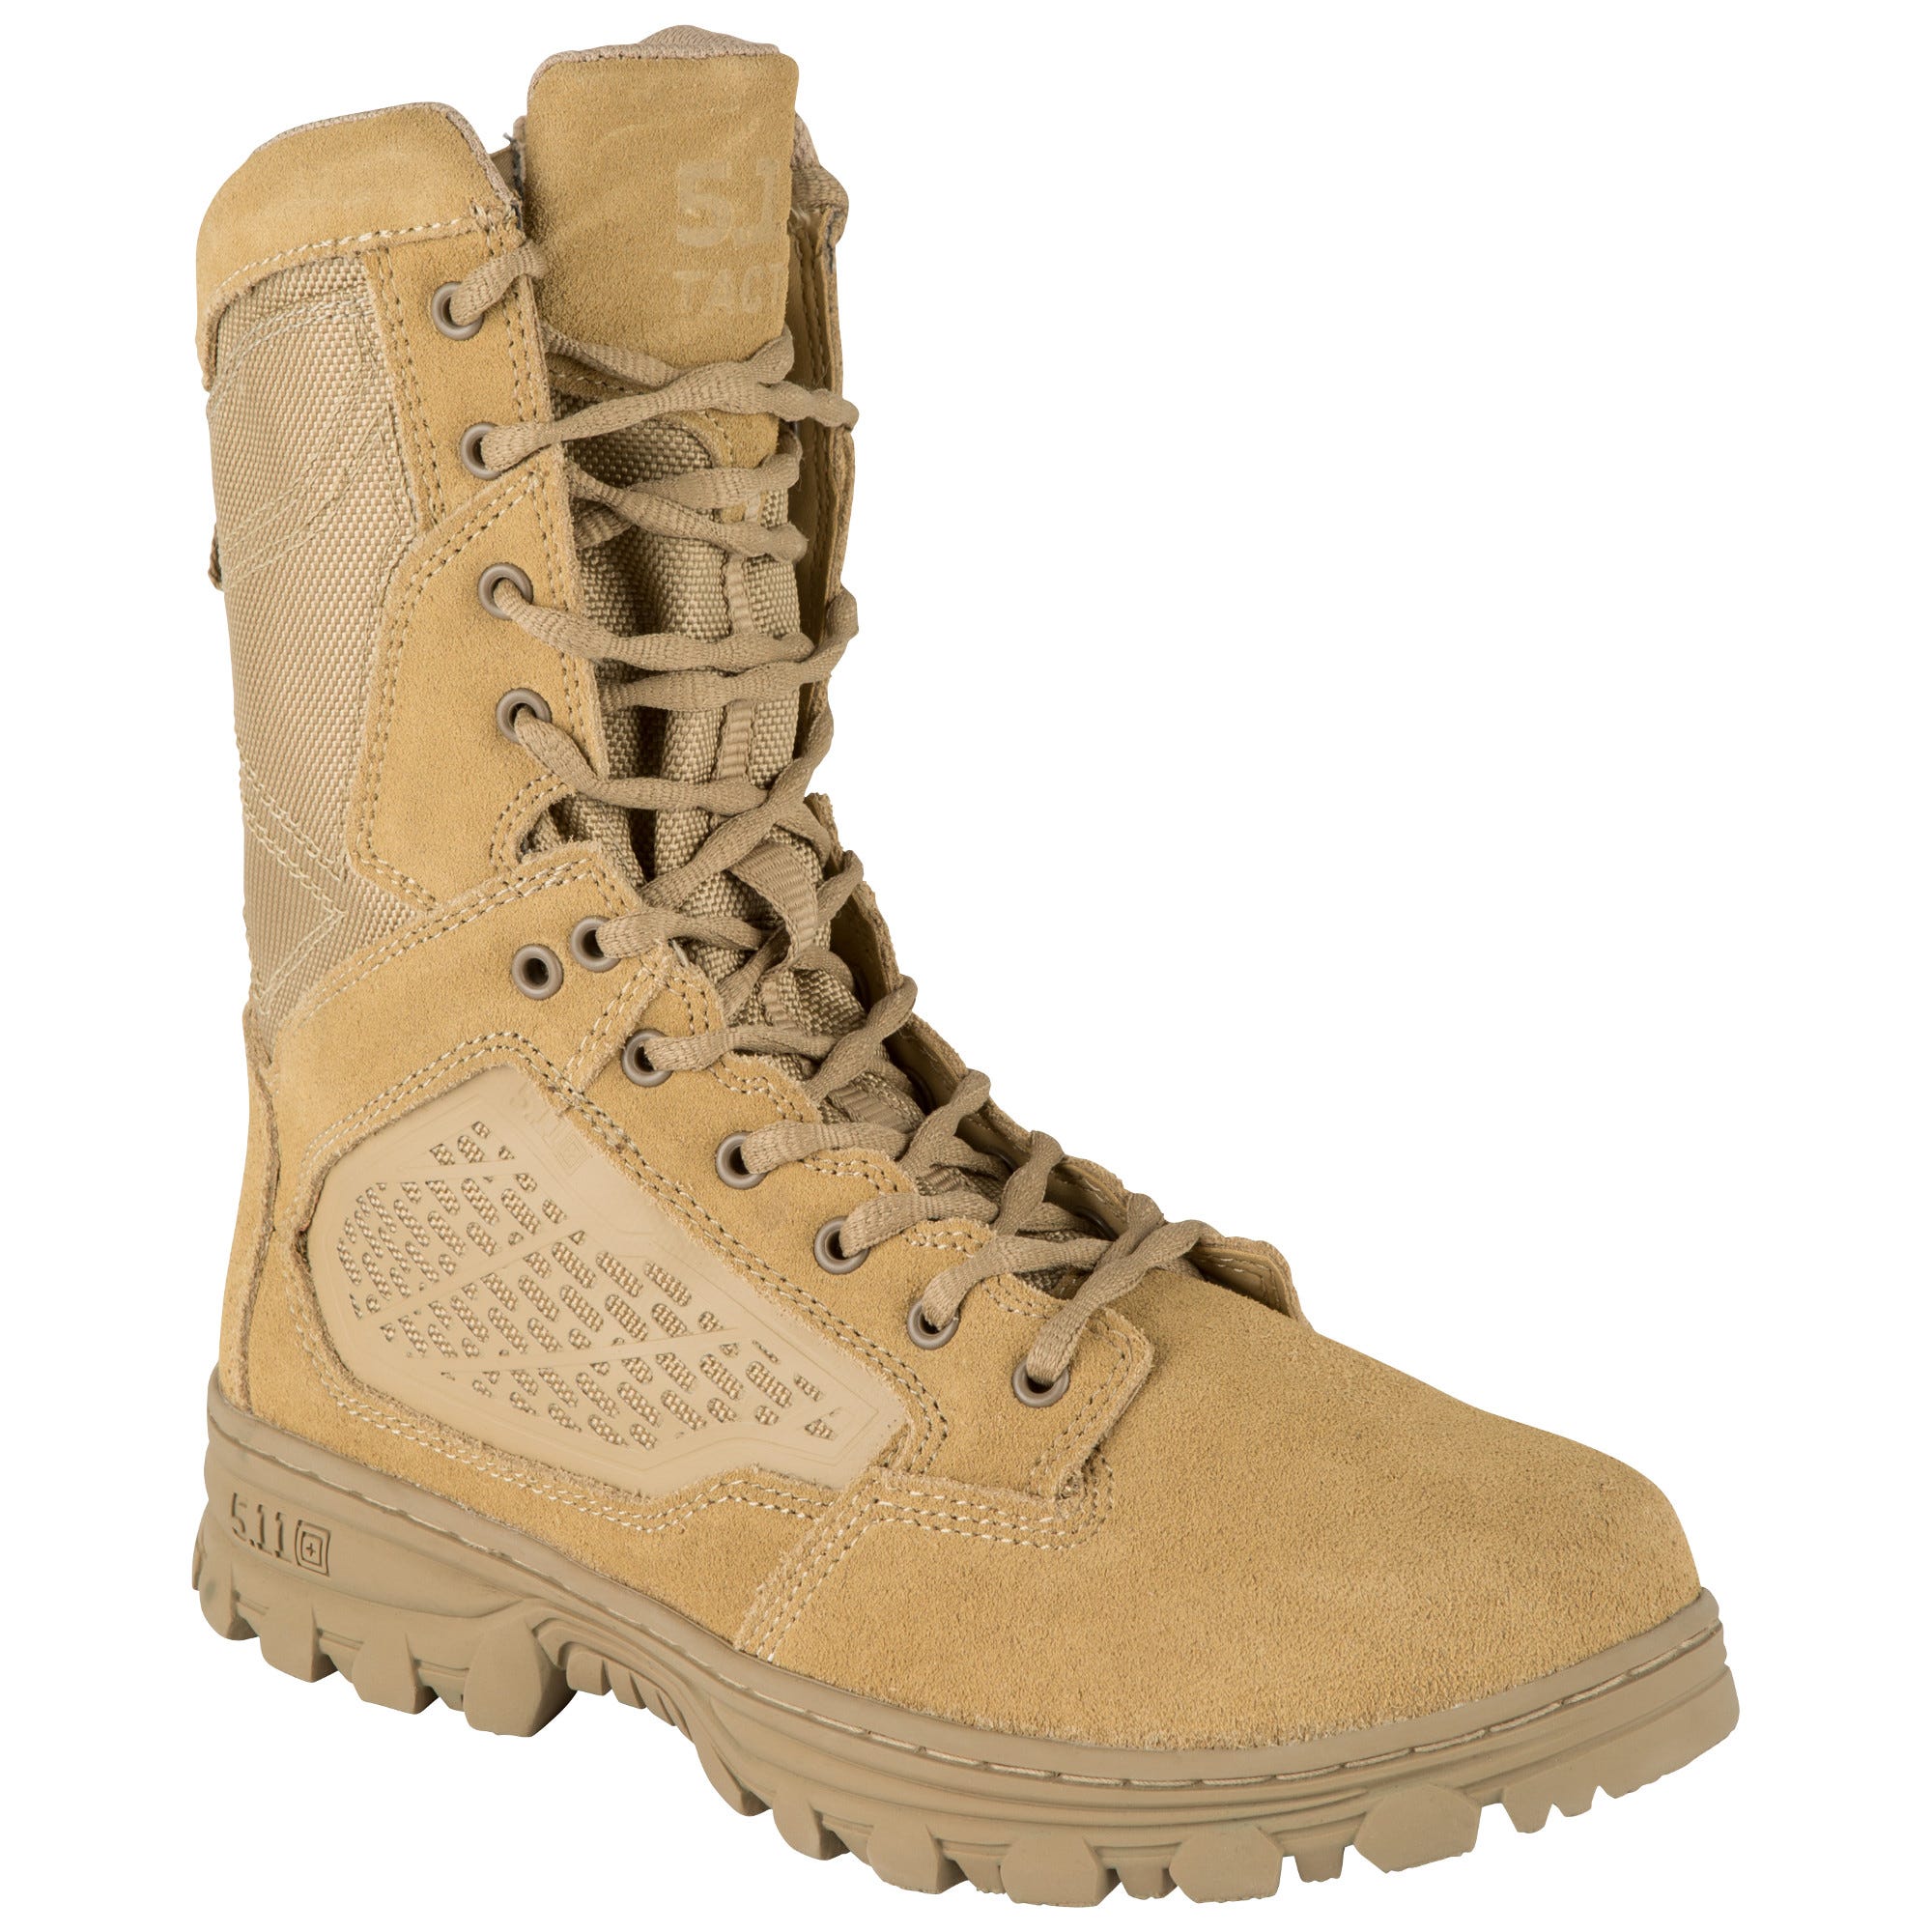 Style 12381 Military and Tactical Boot 5.11 mens 8 Apex Tactical Boot Covert Pocket All Day Support